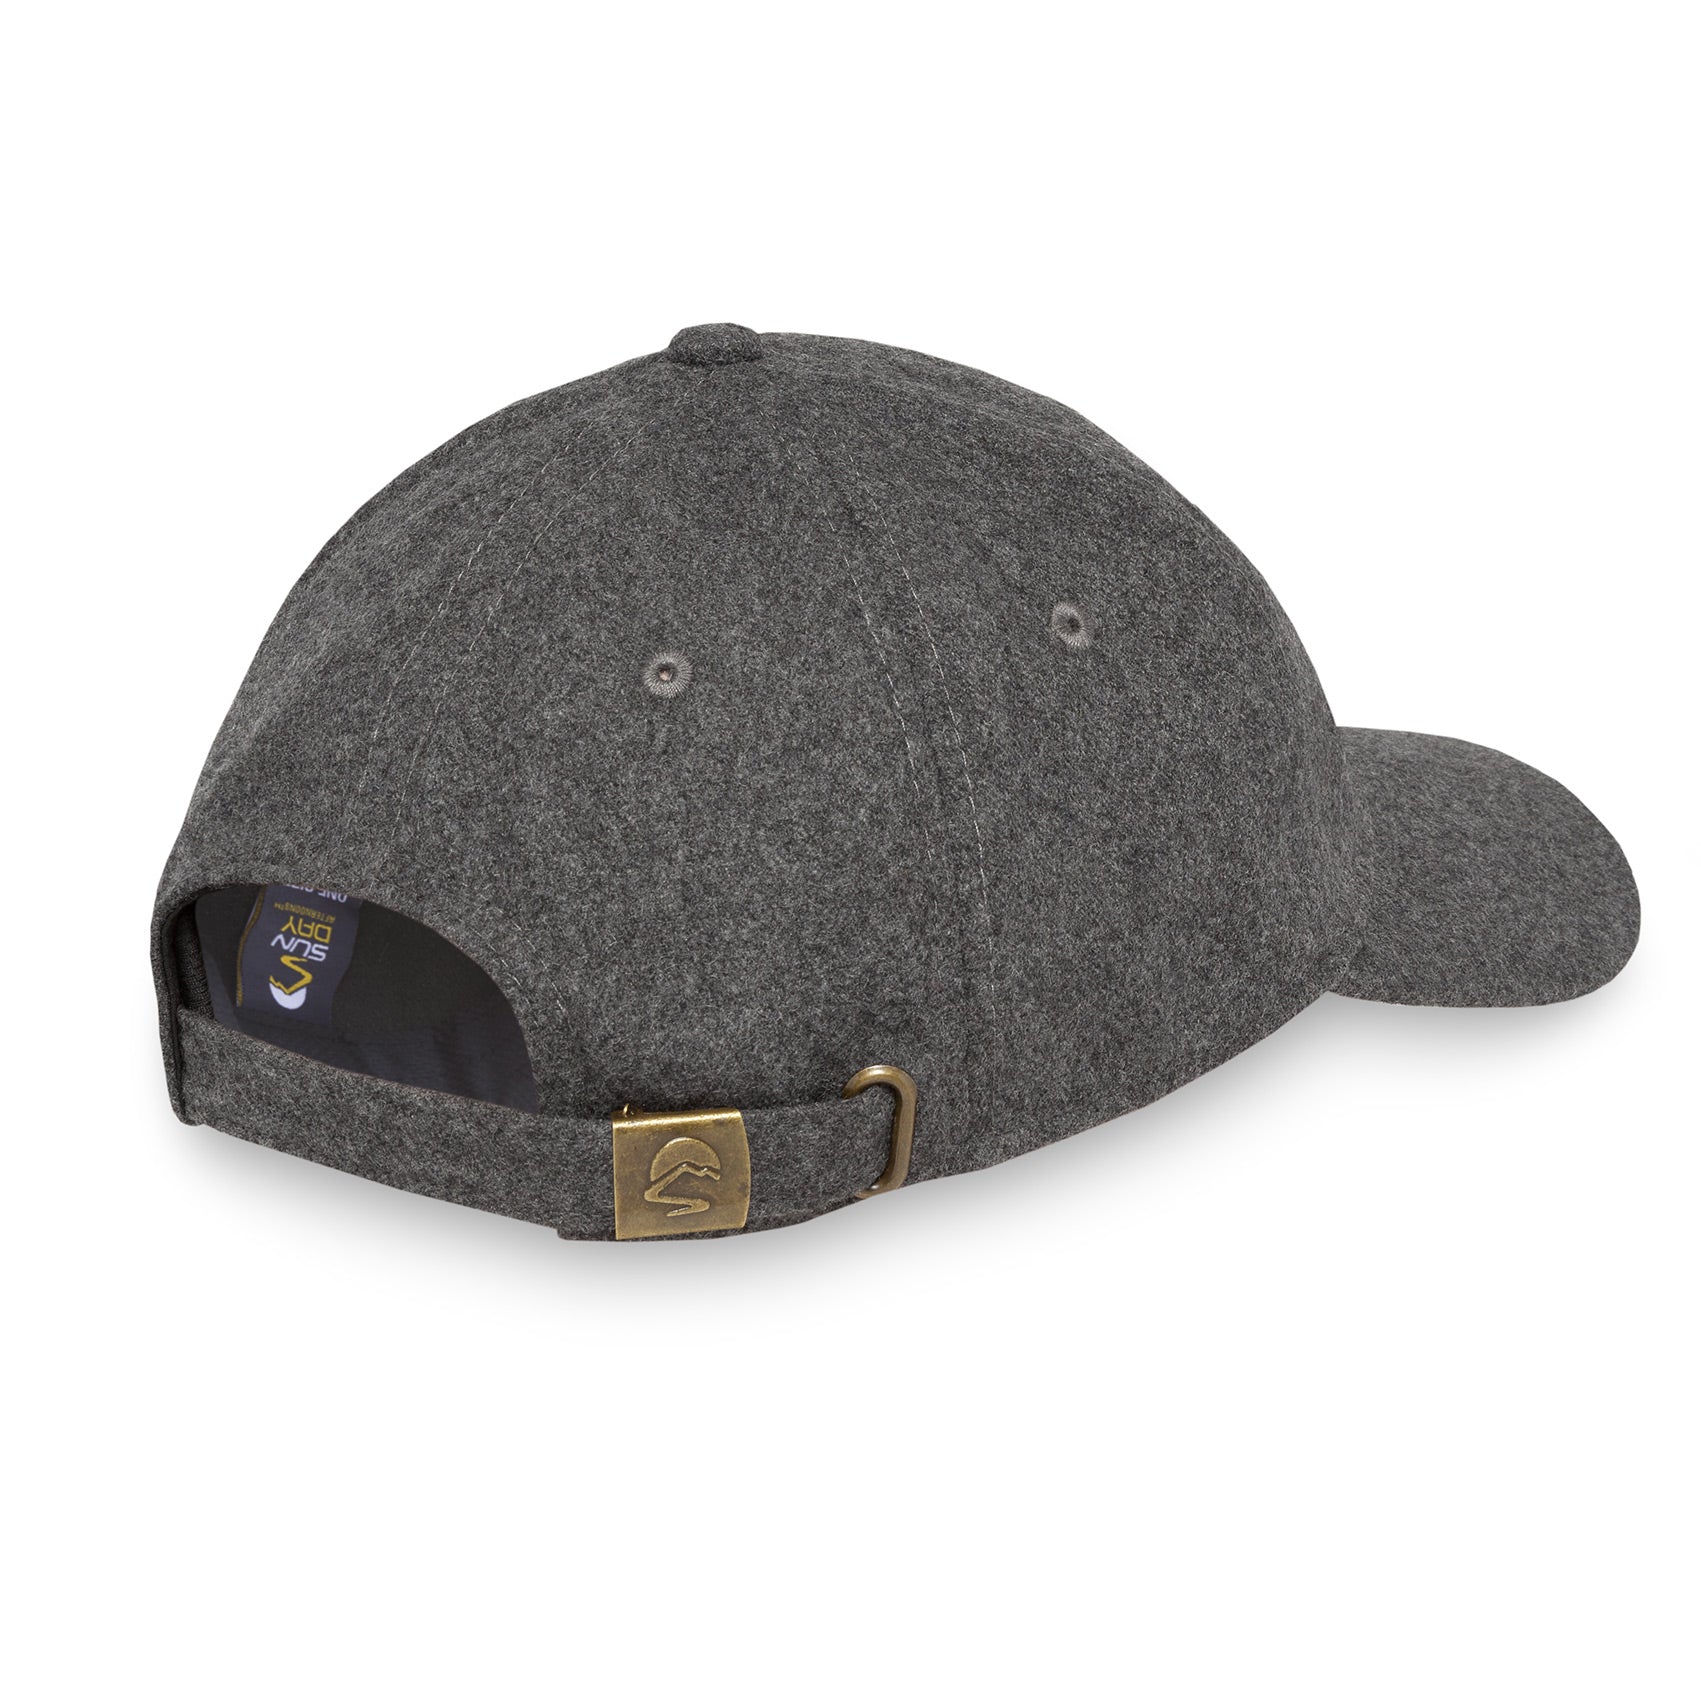 sunday afternoons ridgeline cap in heather grey back view